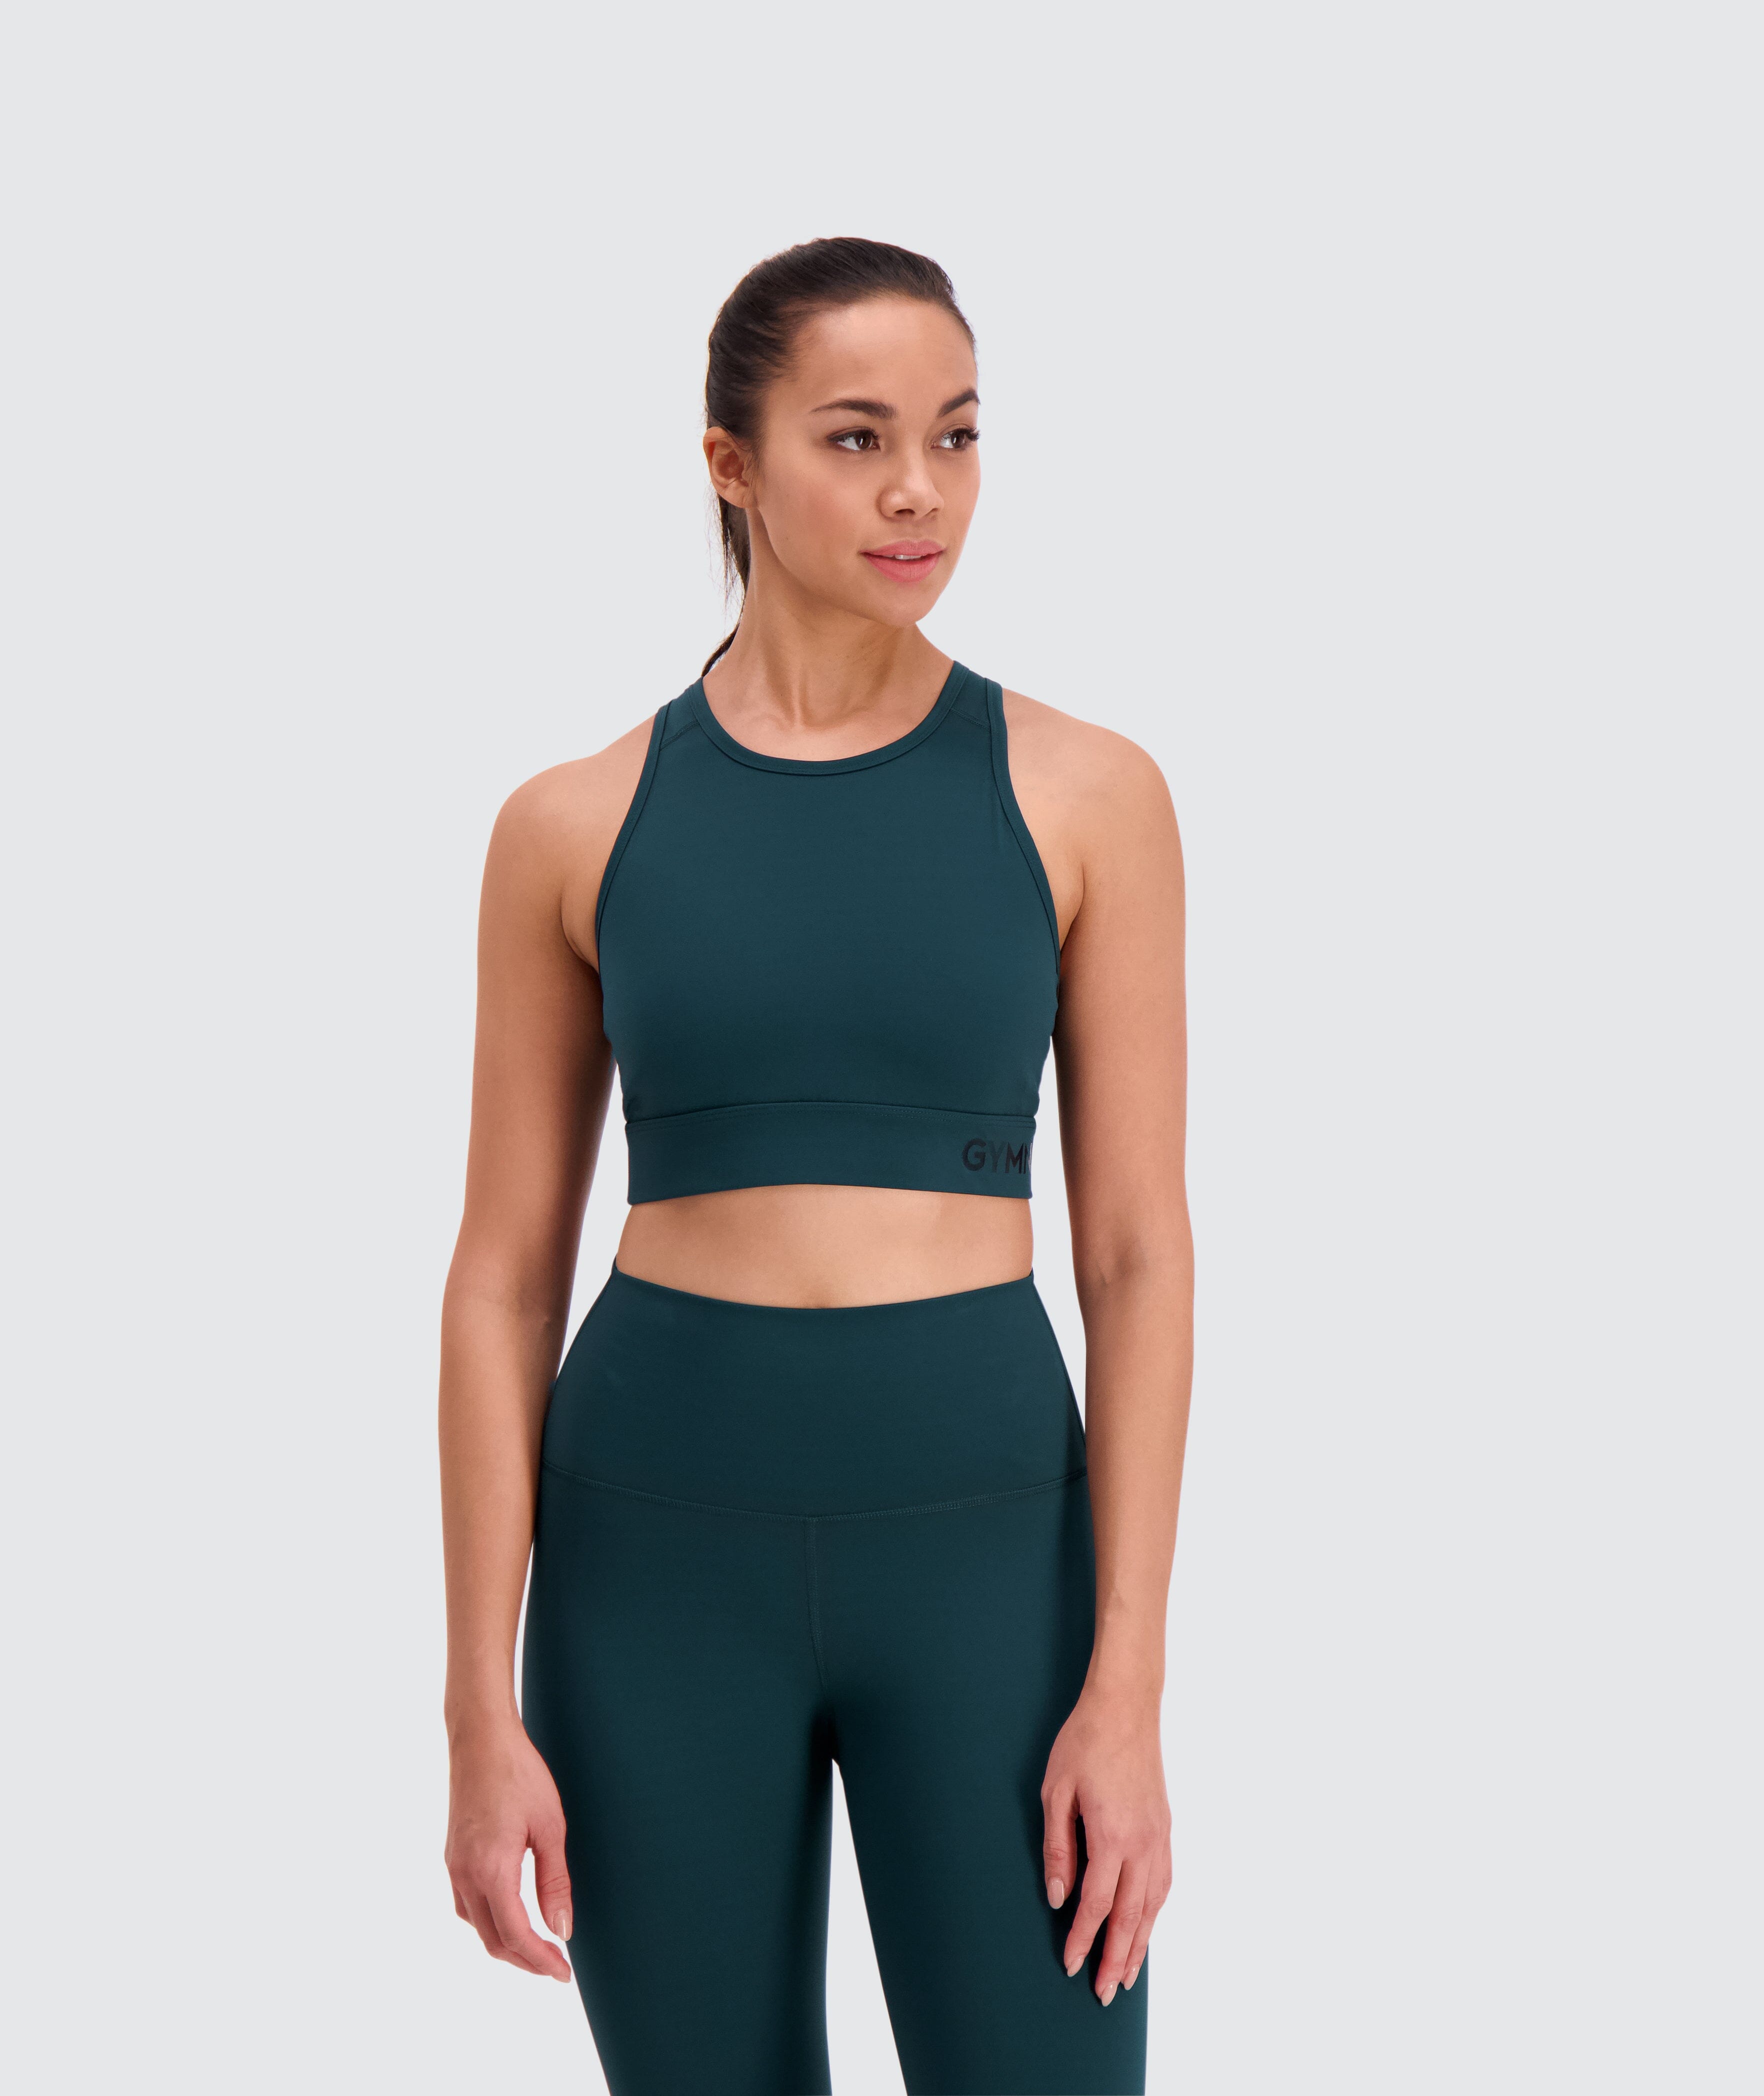 Patagonia Cross Beta Sports Bra - Women's for Sale, Reviews, Deals and  Guides